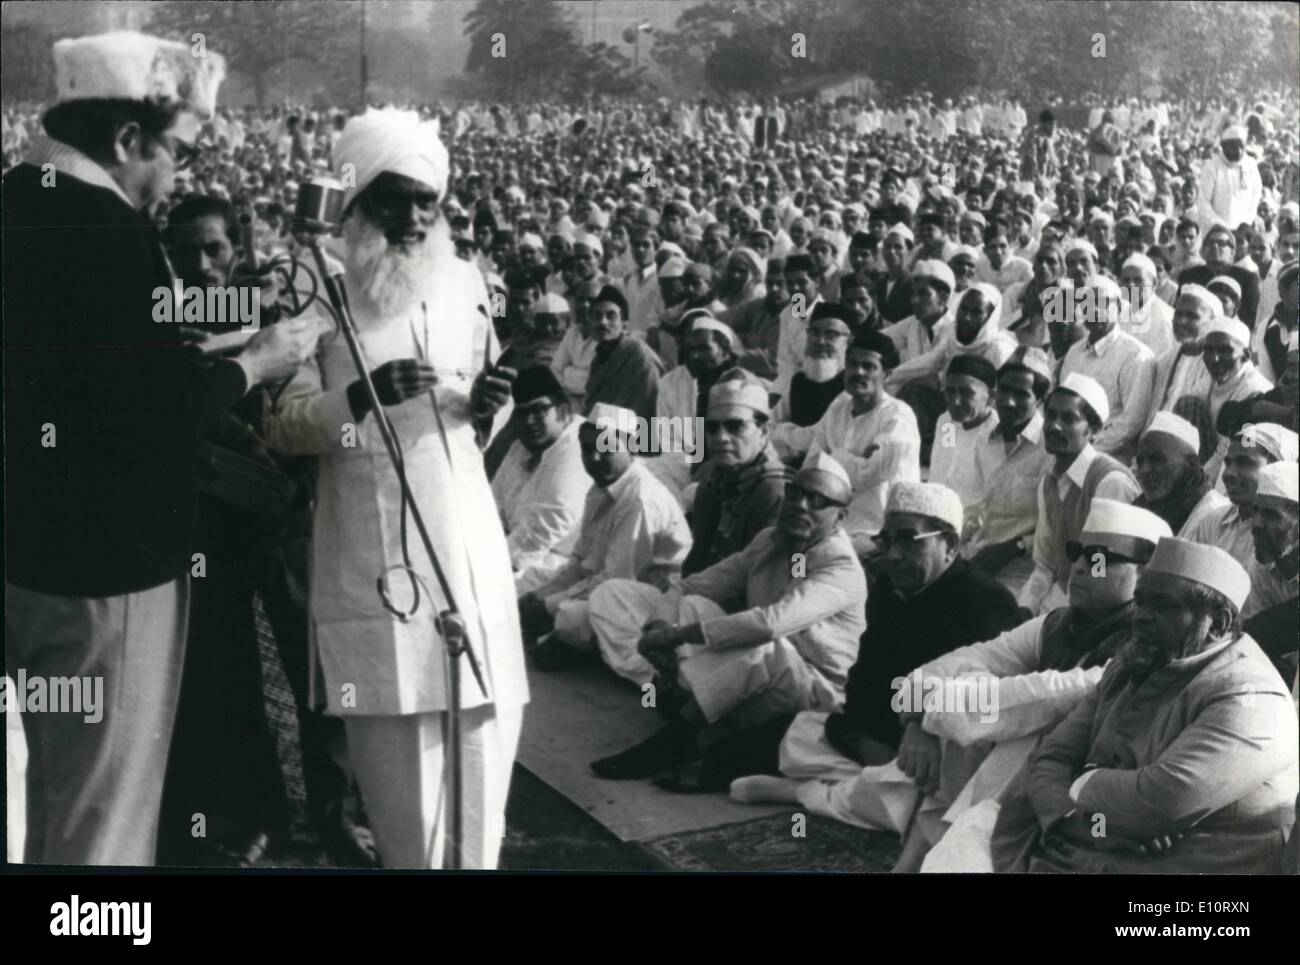 Jan. 01, 1974 - MR. S.S Ray, Chief Minister of W. Bengal addressing at the Bakn-Rid Rally at Maidan in Calcutta on Saturday - January 5th. 1974. Stock Photo